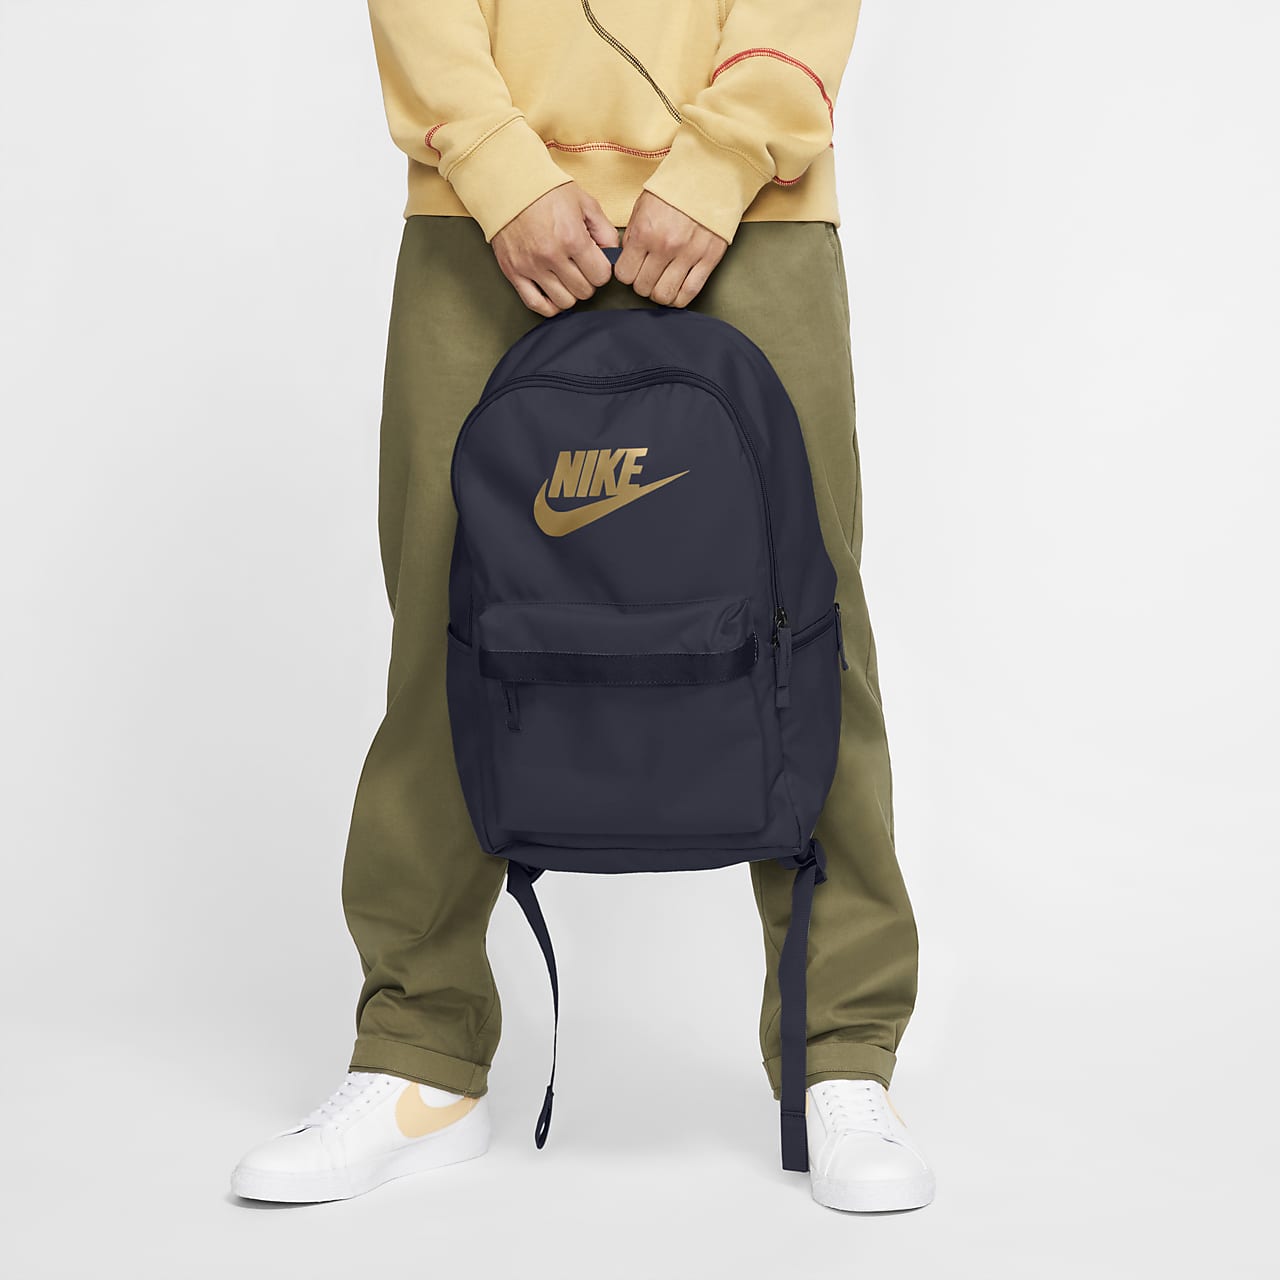 nike heritage 2.0 backpack review